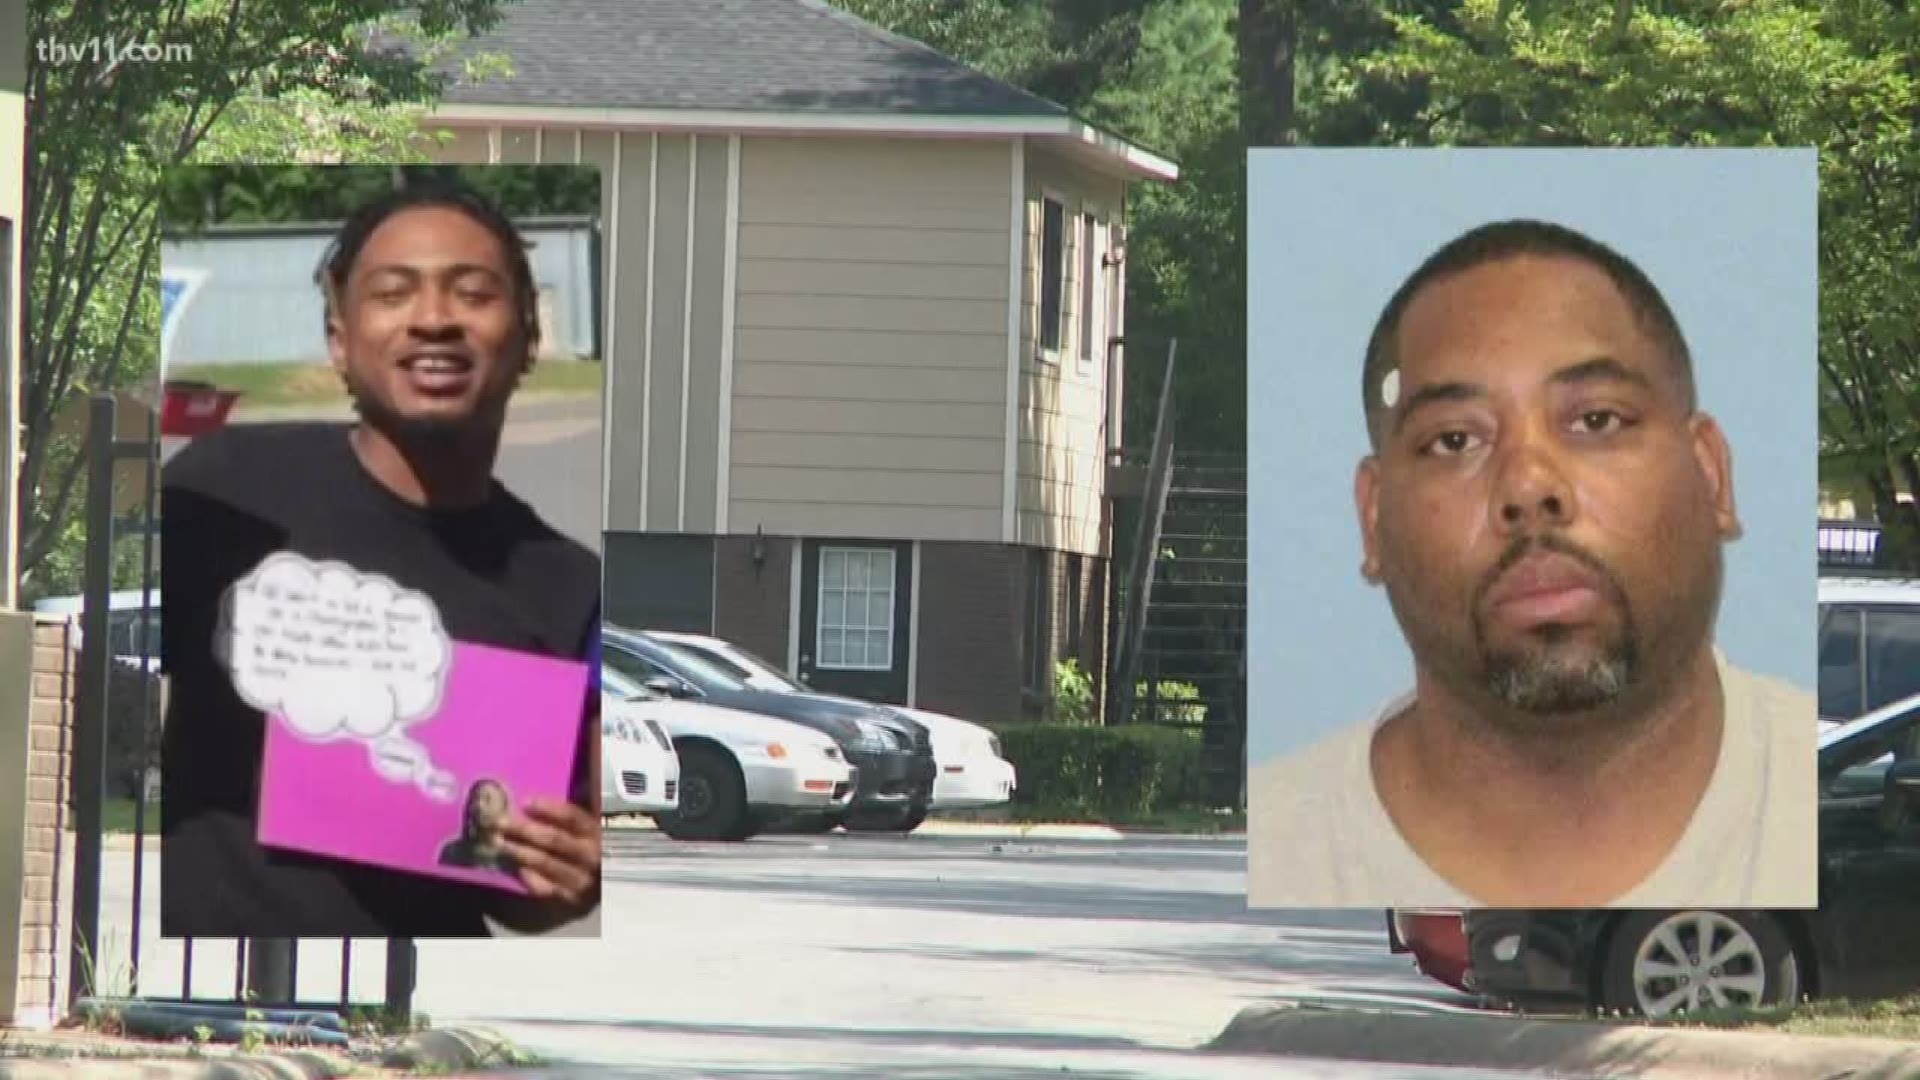 Piggee is accused of shooting and killing 27-year-old Jeremy Chambers at the Spanish Valley apartments in Little Rock's south side on June ninth.